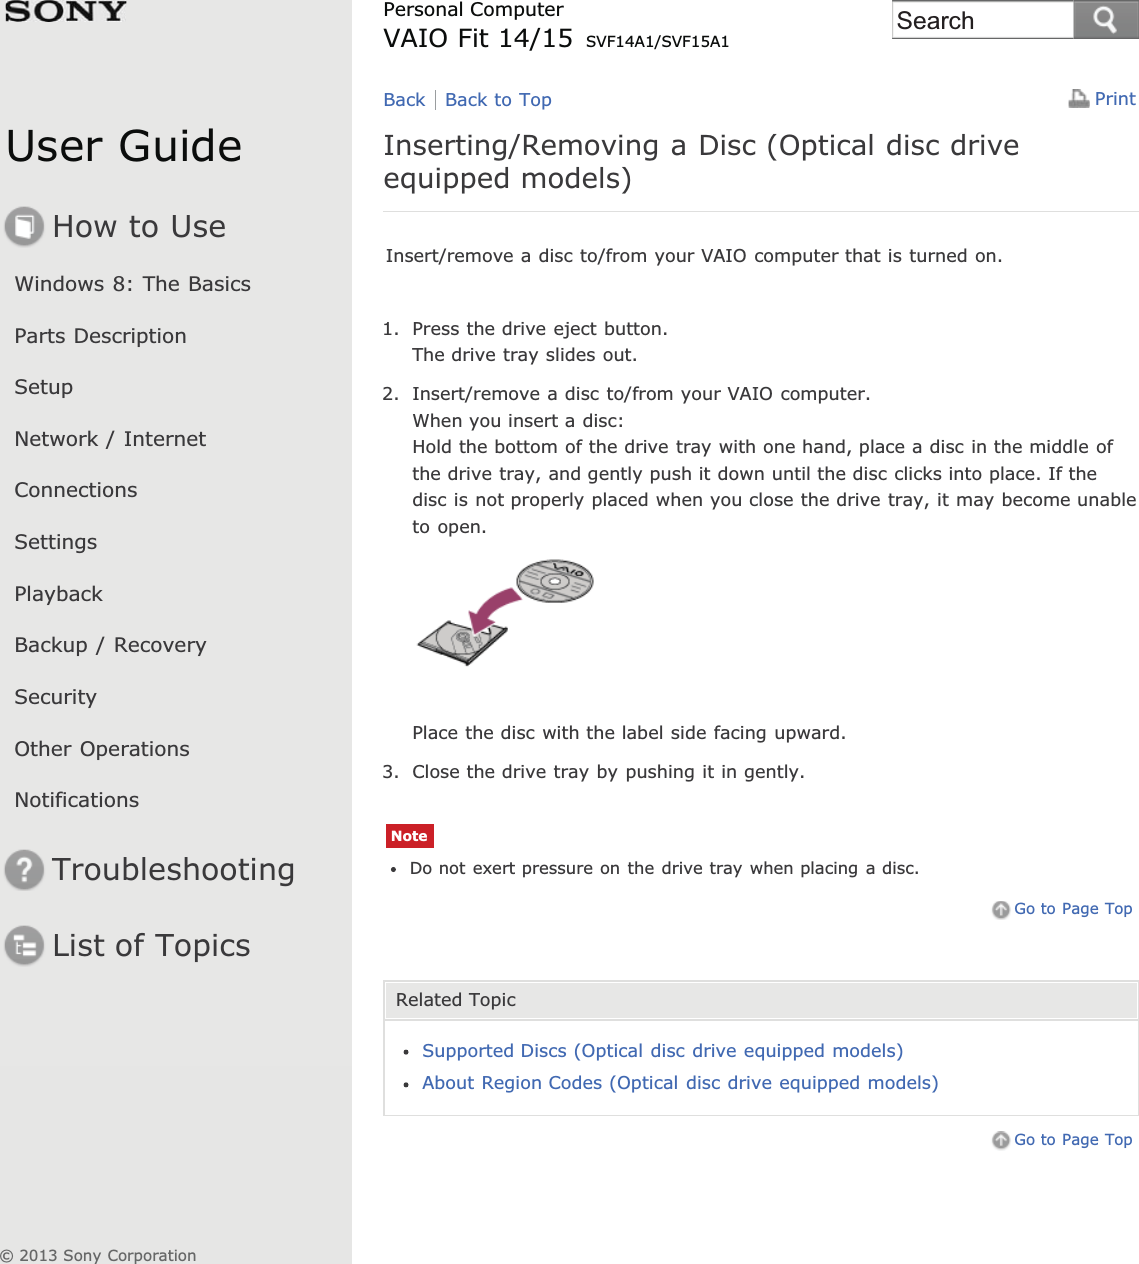 User GuideHow to UseWindows 8: The BasicsParts DescriptionSetupNetwork / InternetConnectionsSettingsPlaybackBackup / RecoverySecurityOther OperationsNotificationsTroubleshootingList of TopicsPrintPersonal ComputerVAIO Fit 14/15 SVF14A1/SVF15A1Inserting/Removing a Disc (Optical disc driveequipped models)Insert/remove a disc to/from your VAIO computer that is turned on.1. Press the drive eject button.The drive tray slides out.2. Insert/remove a disc to/from your VAIO computer.When you insert a disc:Hold the bottom of the drive tray with one hand, place a disc in the middle ofthe drive tray, and gently push it down until the disc clicks into place. If thedisc is not properly placed when you close the drive tray, it may become unableto open.Place the disc with the label side facing upward.3. Close the drive tray by pushing it in gently.NoteDo not exert pressure on the drive tray when placing a disc.Go to Page TopRelated TopicSupported Discs (Optical disc drive equipped models)About Region Codes (Optical disc drive equipped models)Go to Page TopBack Back to Top© 2013 Sony CorporationSearch